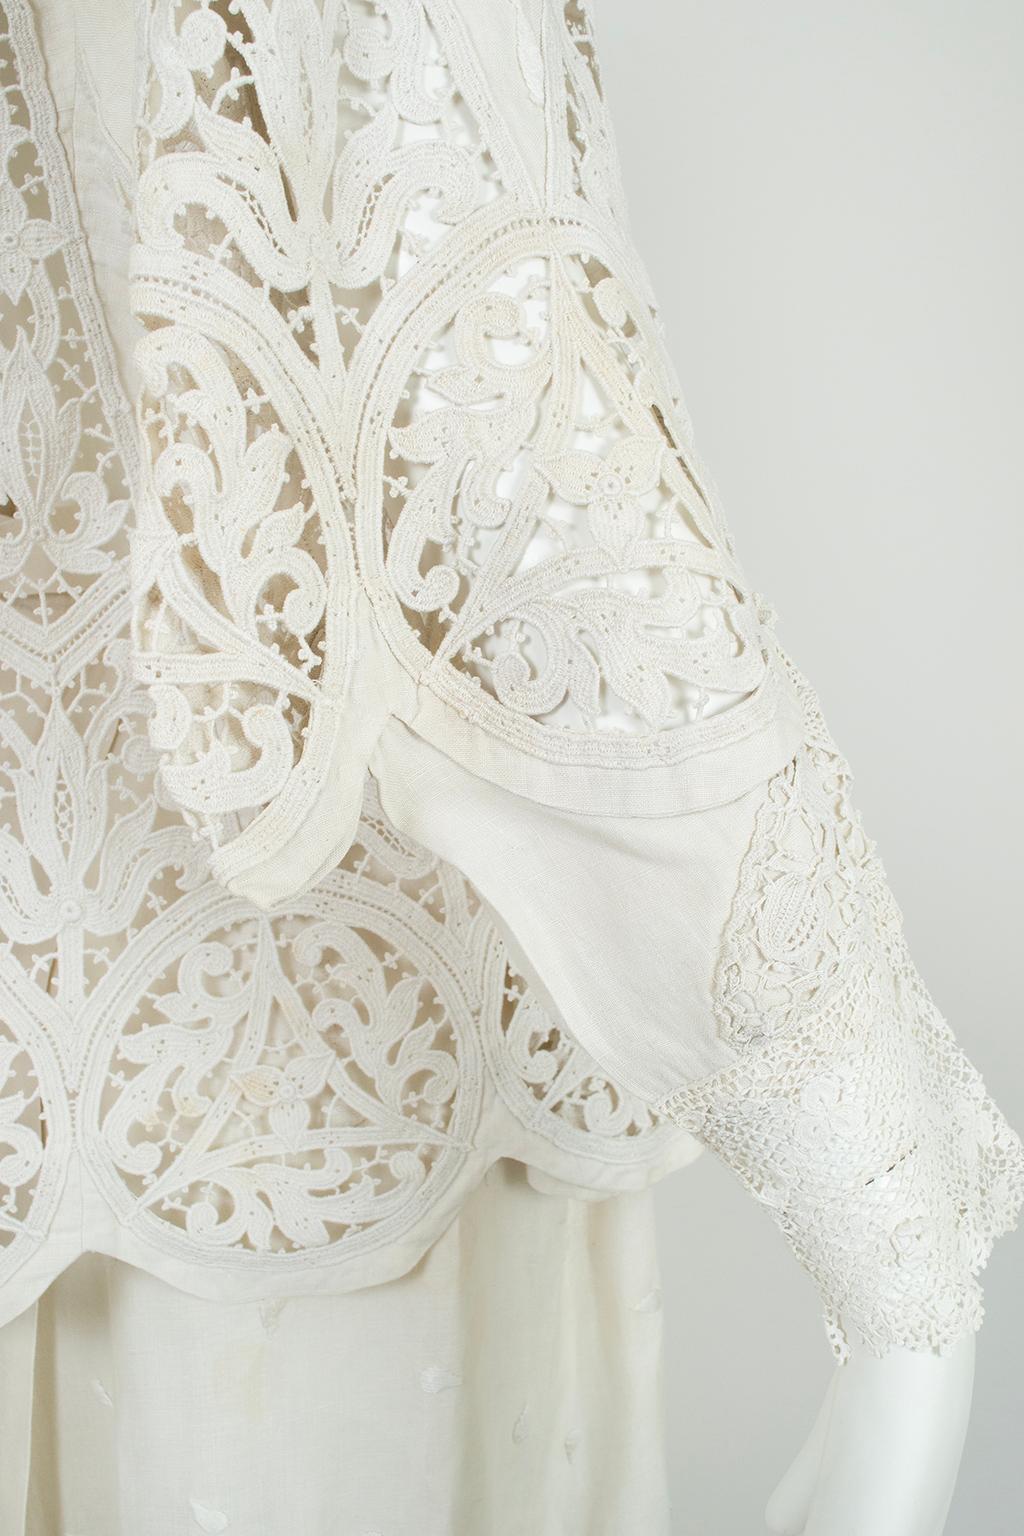 Edwardian White Irish Crochet and Cotton Walking or Wedding Suit – L, 1900s For Sale 12